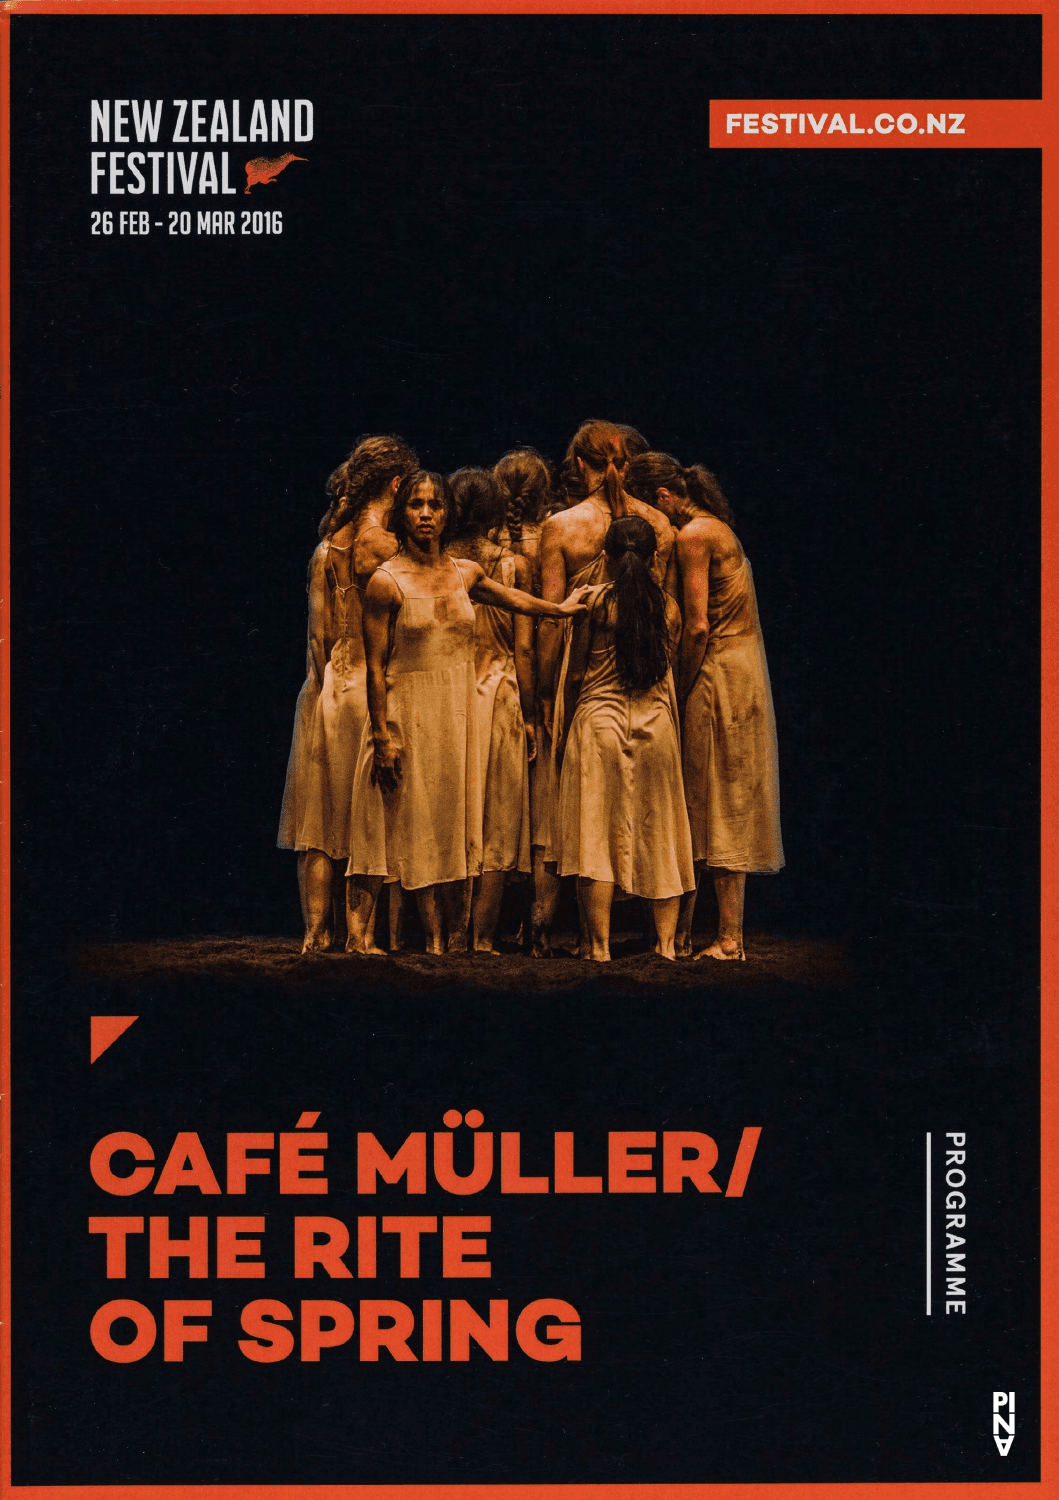 Booklet for “Café Müller” and “The Rite of Spring” by Pina Bausch with Tanztheater Wuppertal in in Wellington, 03/17/2016 – 03/20/2016